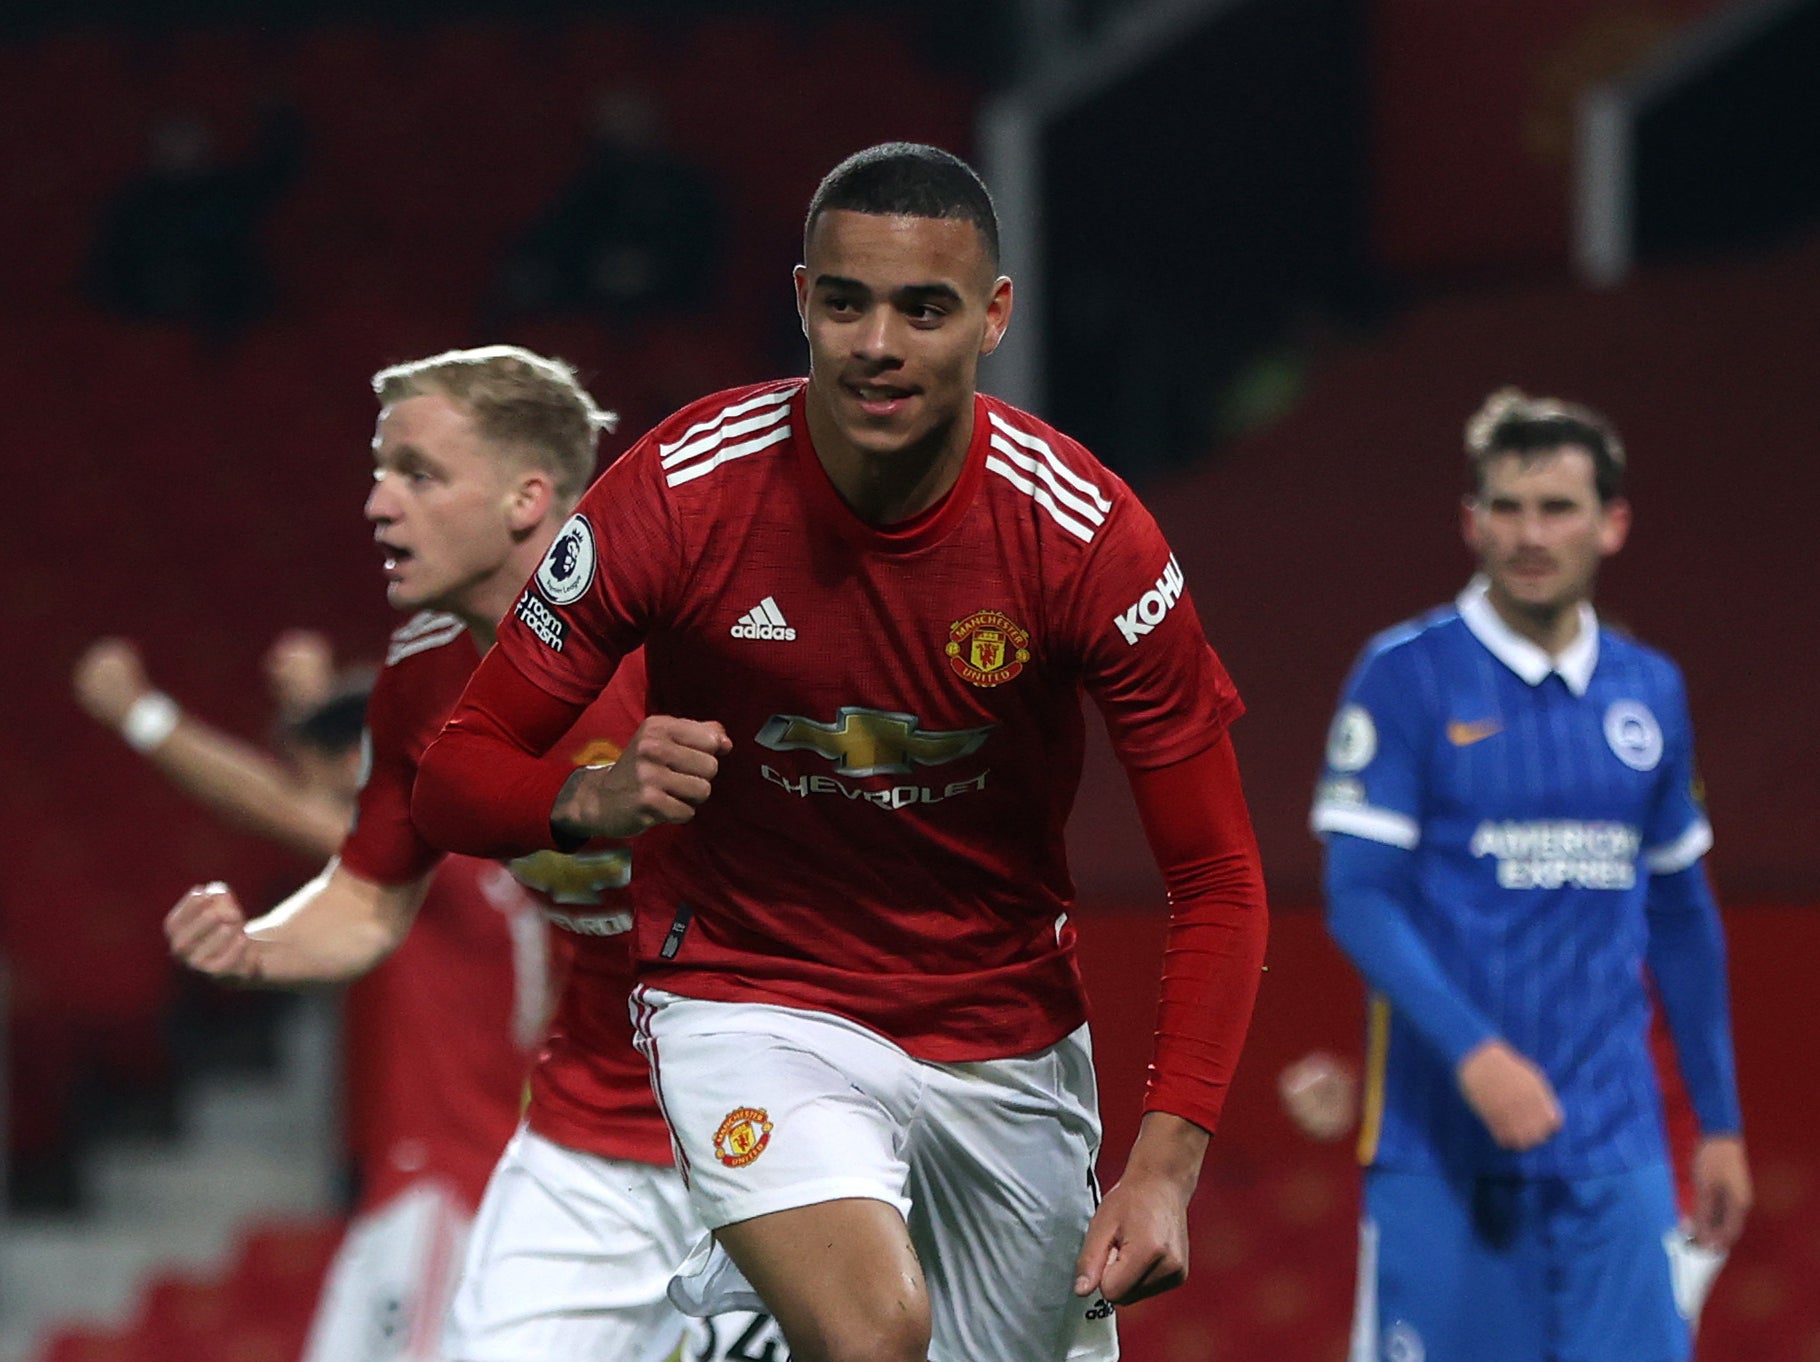 Atticus gentage vedhæng Manchester United vs Brighton report: Premier League result, goals and  highlights | The Independent